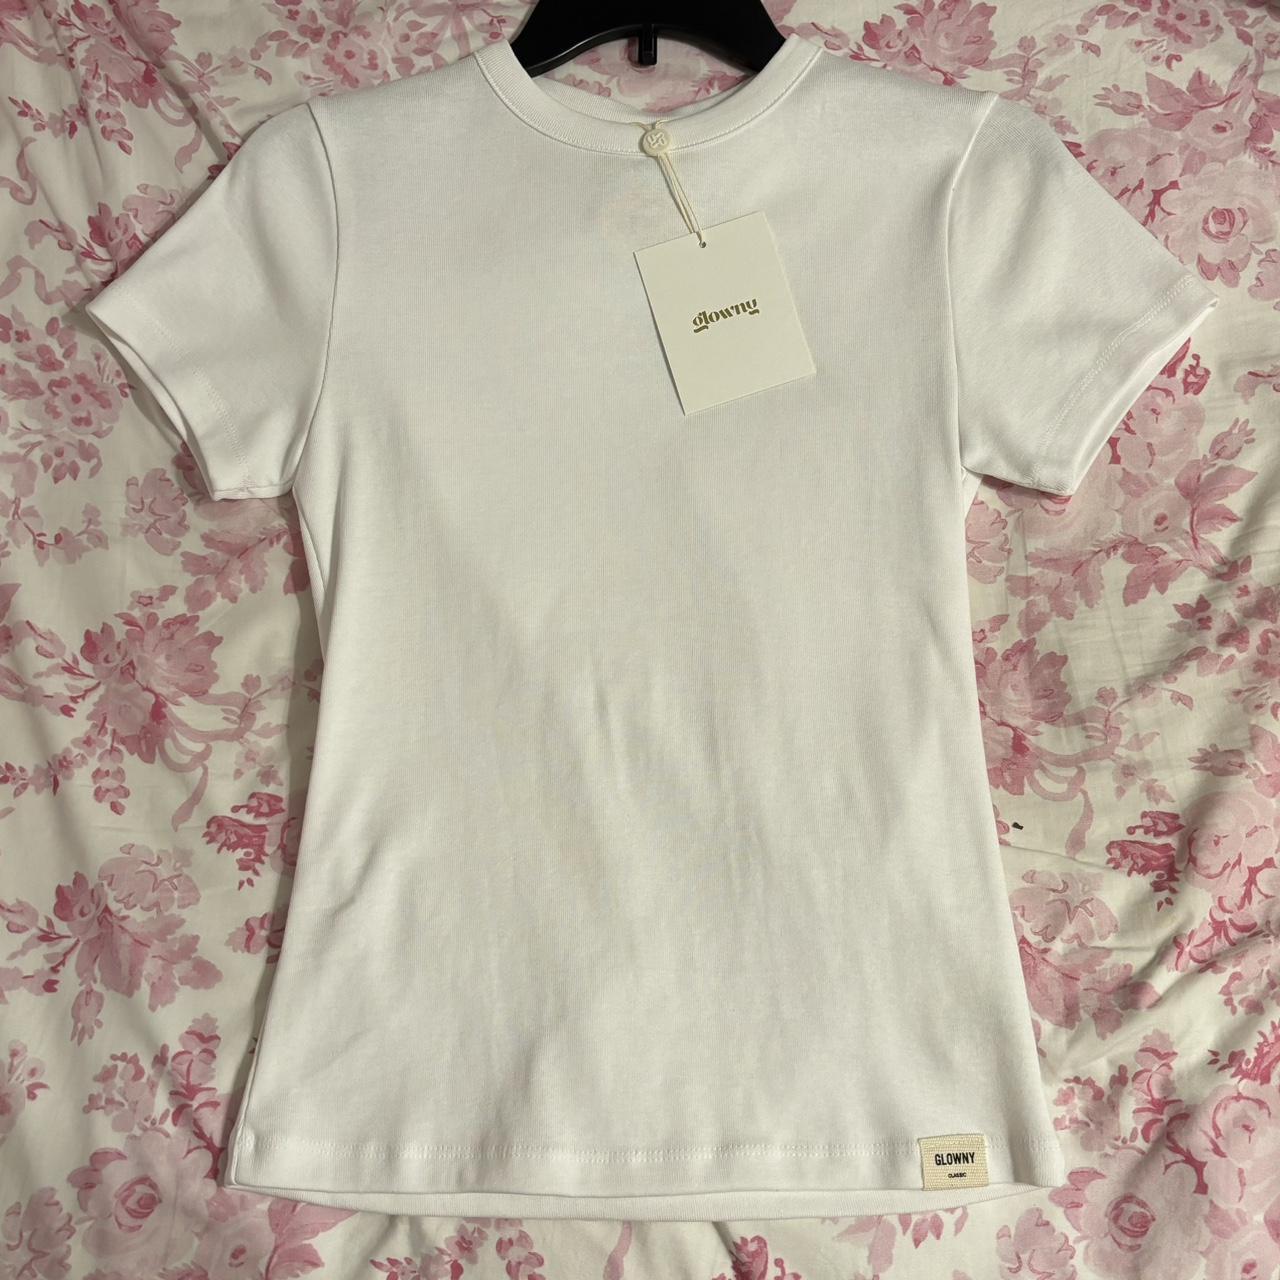 Glowny G Classic Fitted Tee in white, • brand new...